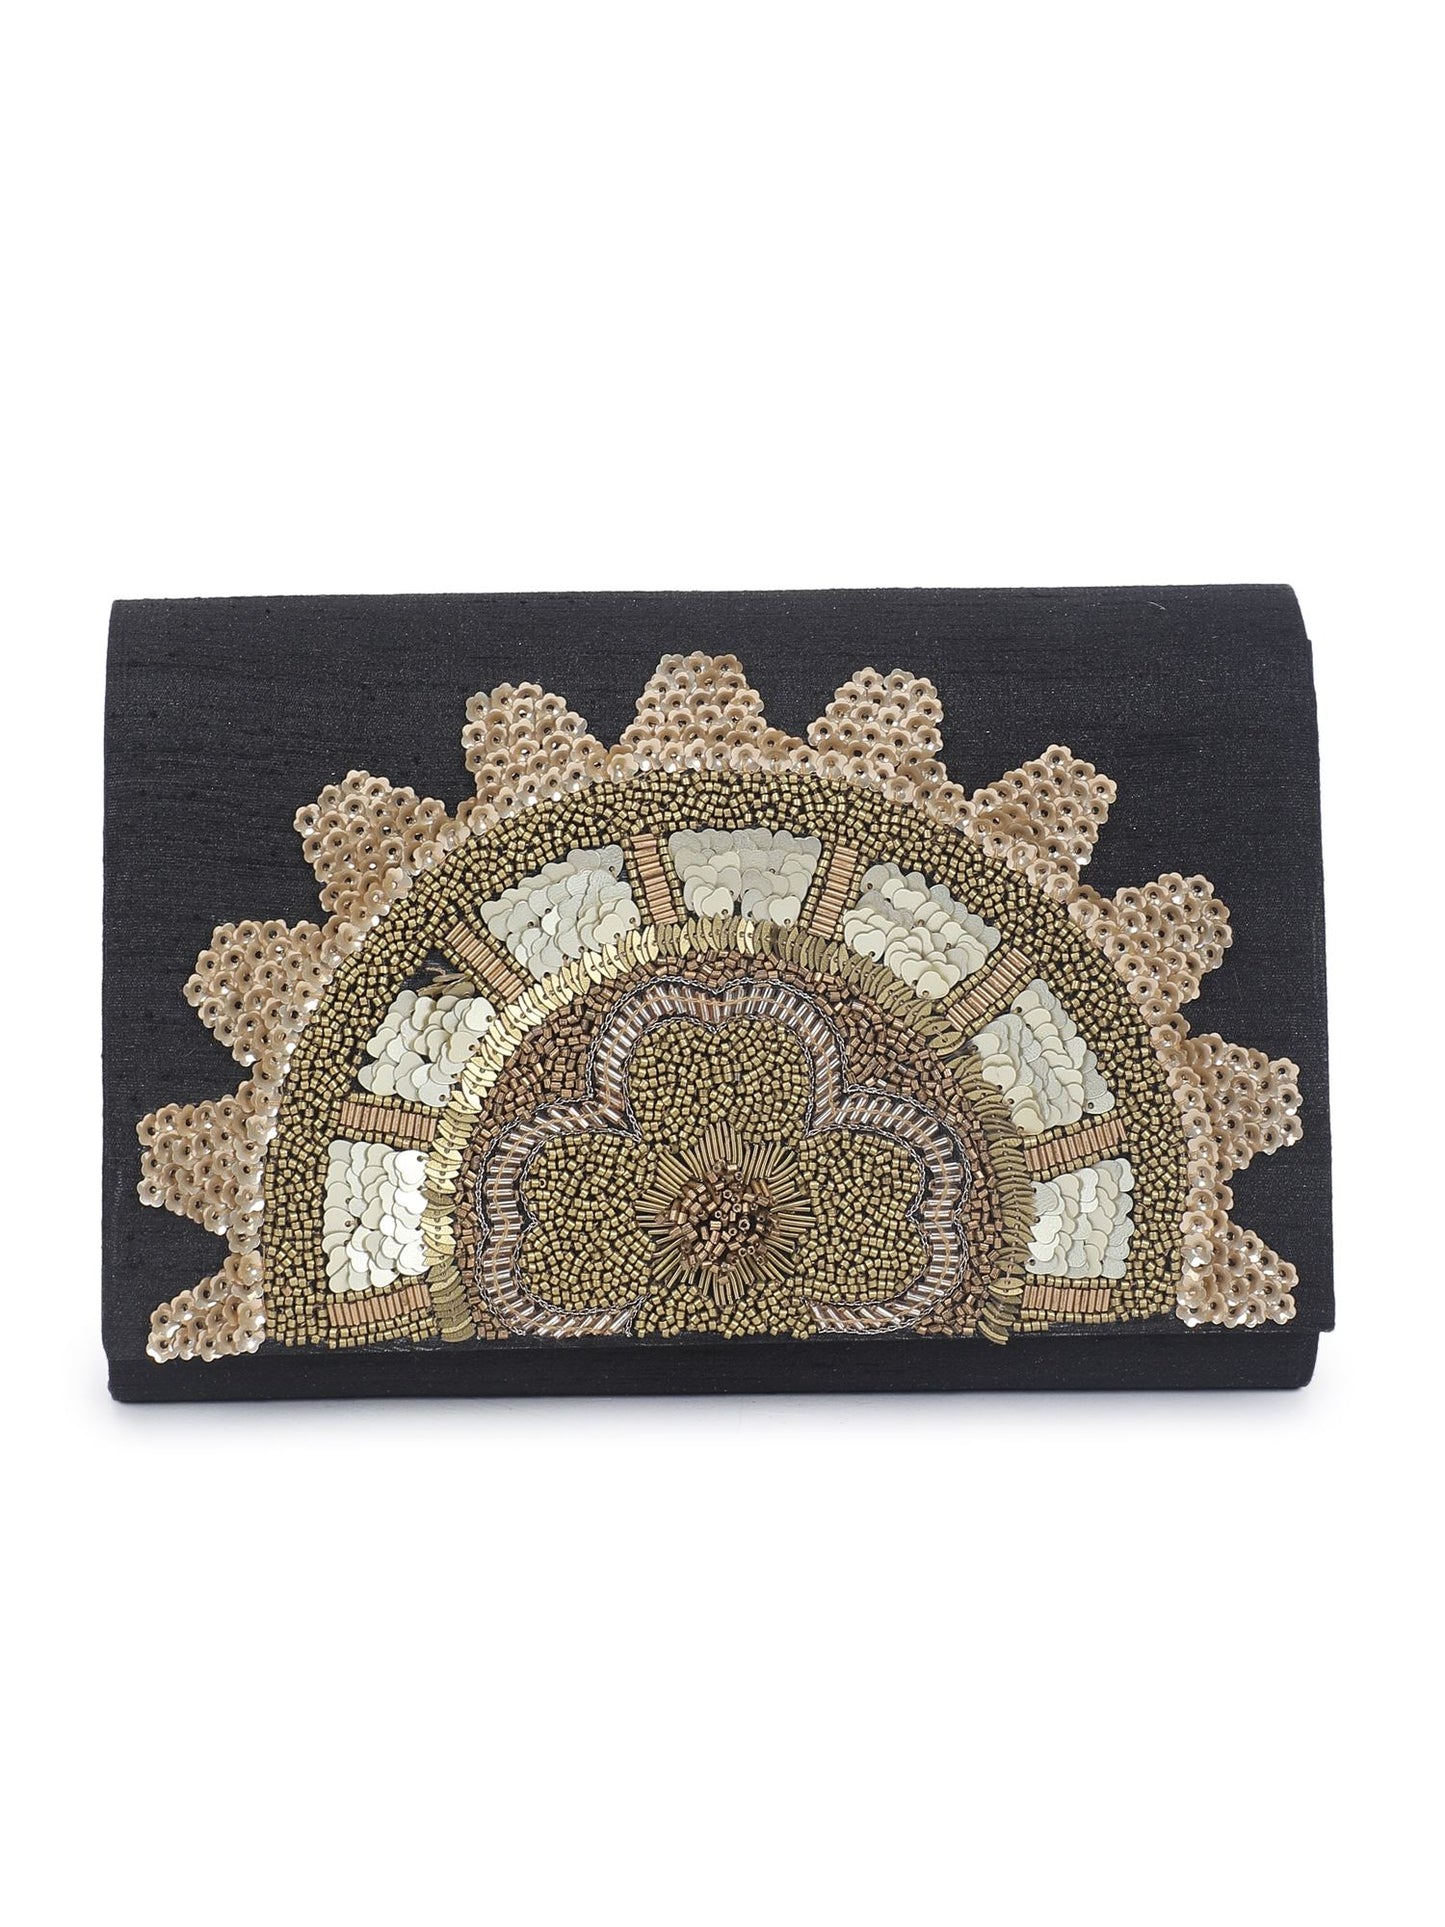 Shades of gold clutch